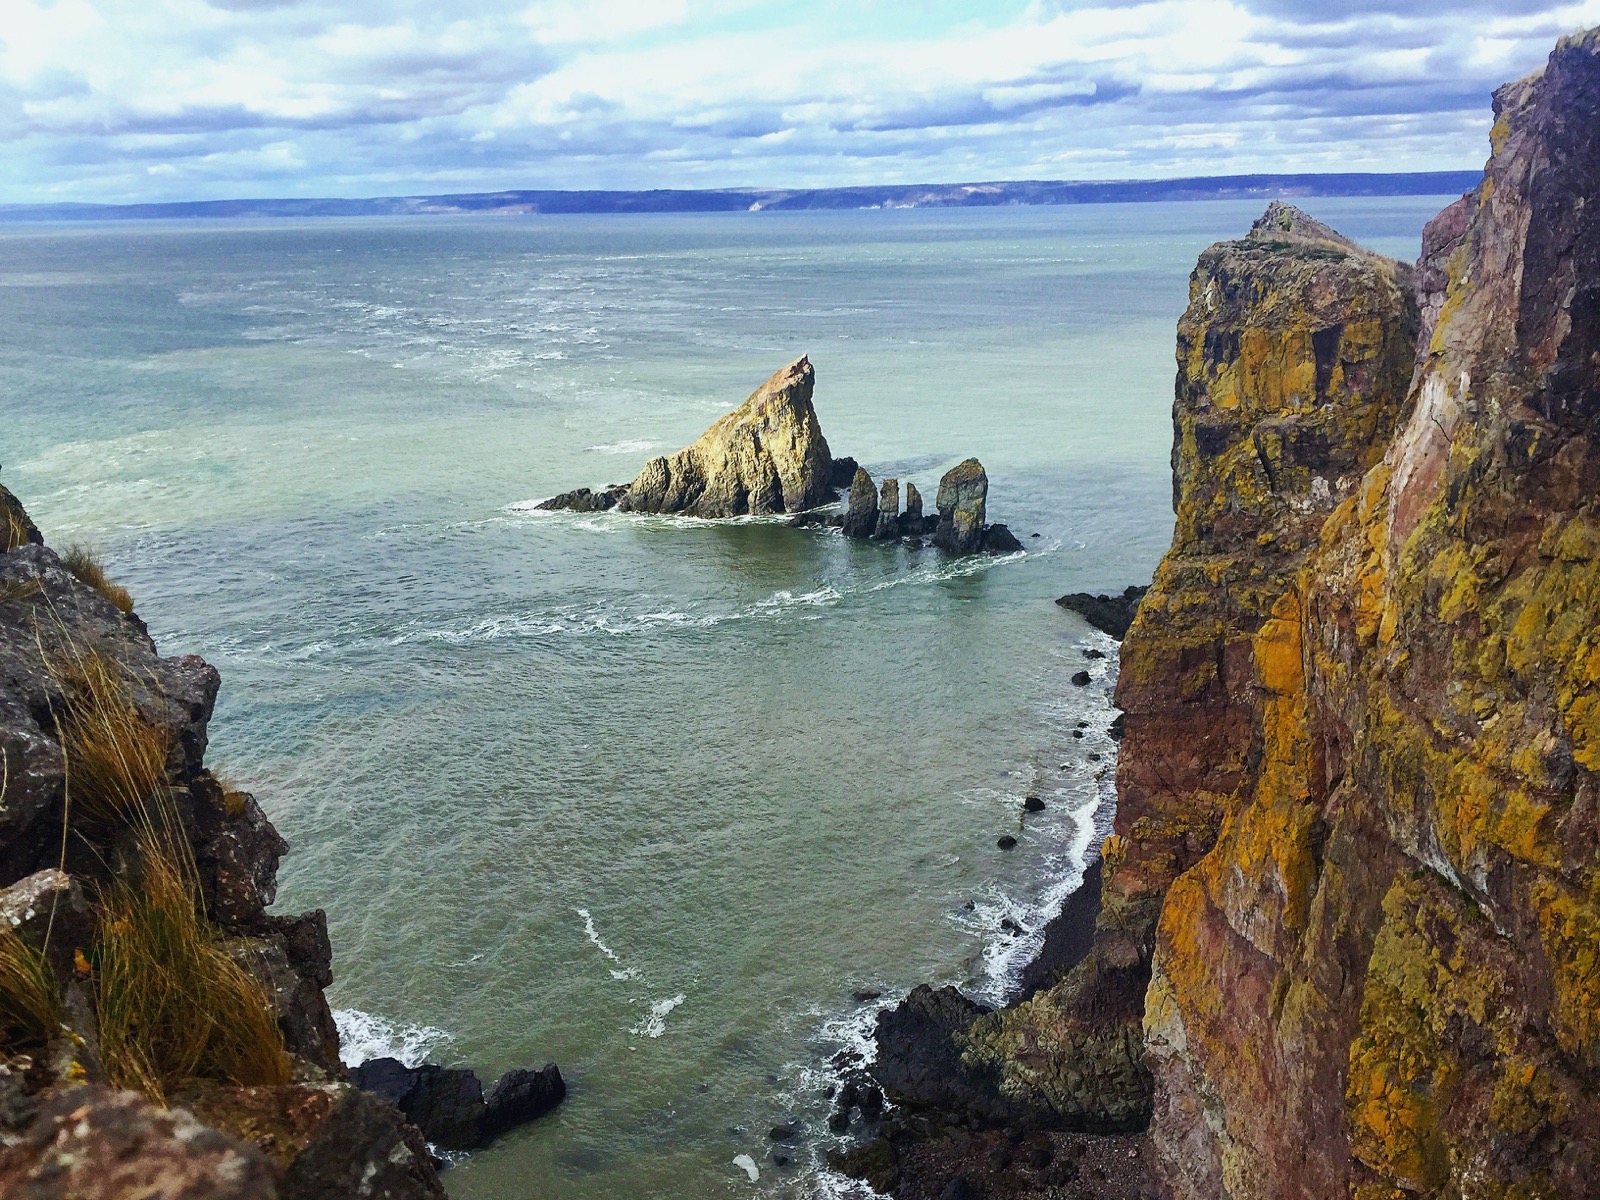 Can You Match These Extraordinary Natural Features to Their Respective Countries? The Bay of Fundy, Nova Scotia, Canada